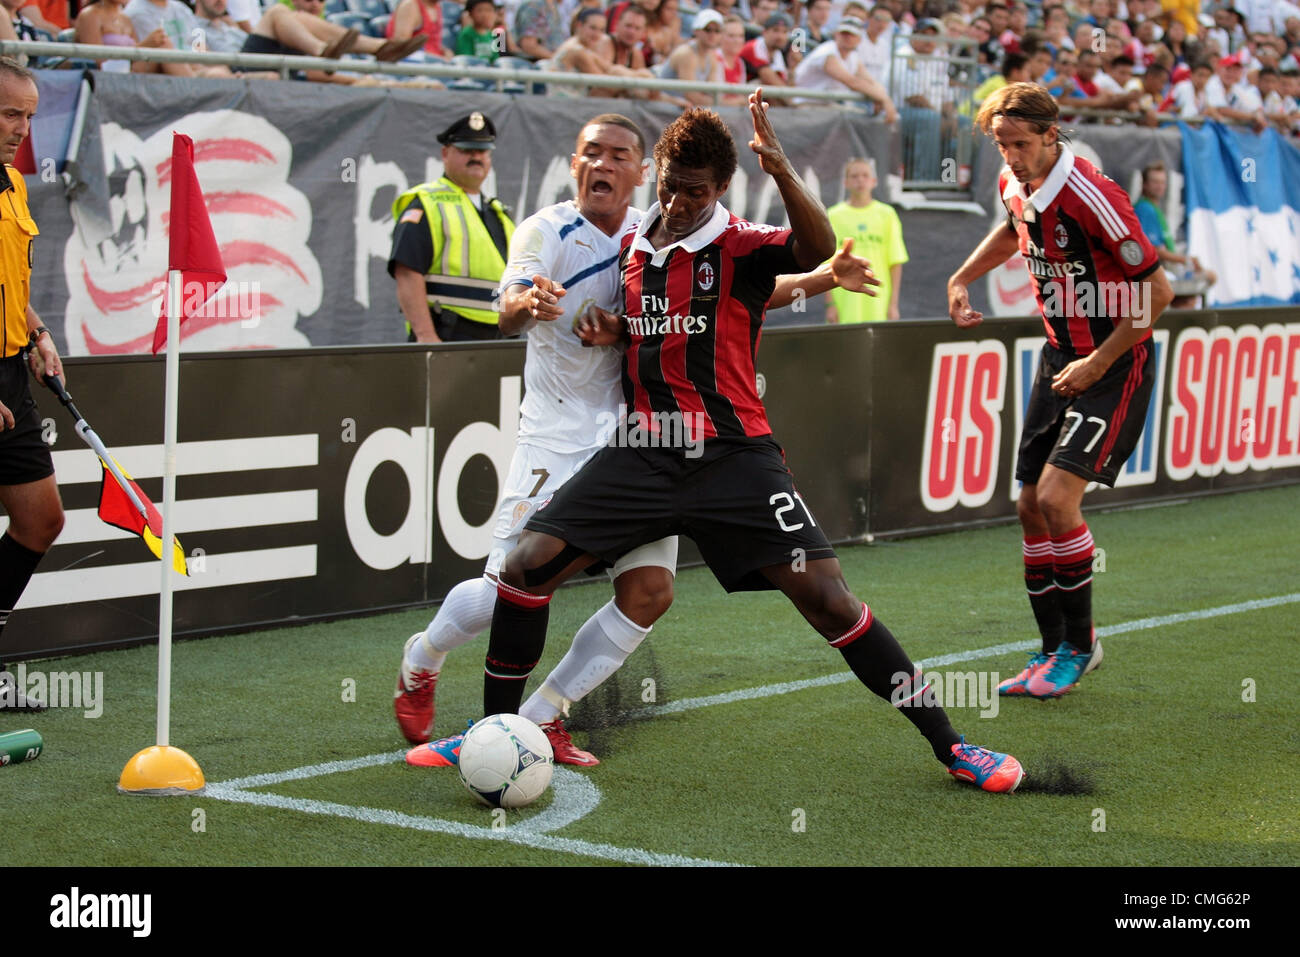 04.08.2012. Massachusetts , USA.  AC Milan's Kevin Constant (21) holds back CD Olimpia's Carlos Will Mejia (7) from the ball. AC Milan lead 3-0 at the half.  AC Milan played CD Olimpia at Gillette Stadium in Foxborough, Massachusetts  on August 4, 2012. Stock Photo